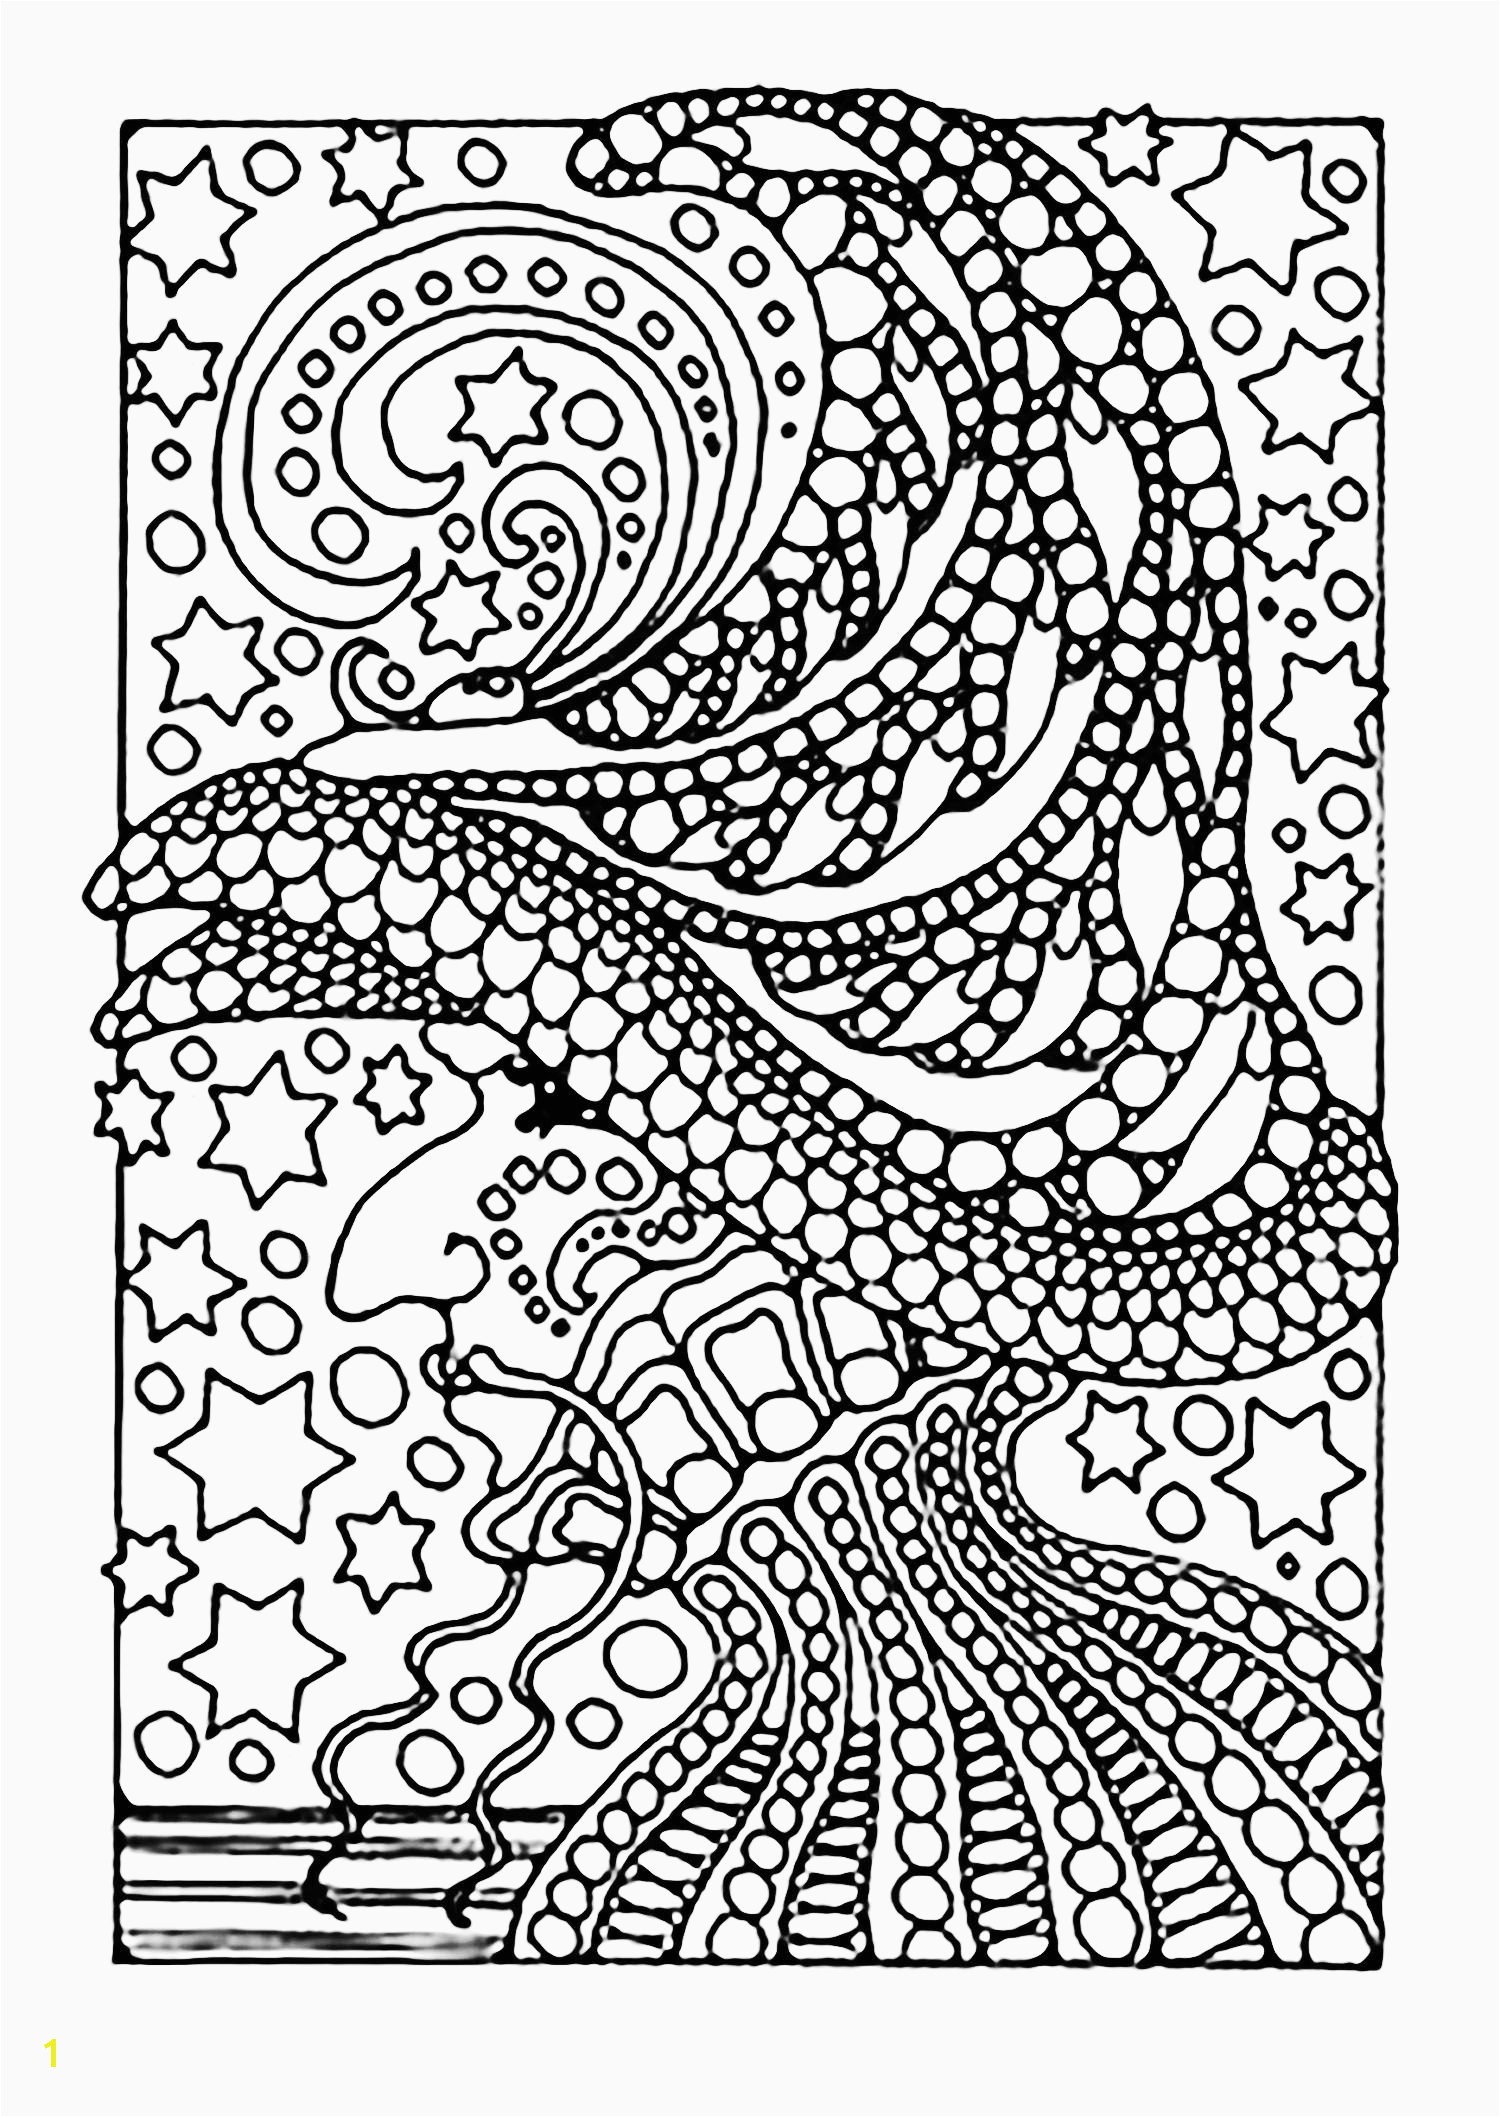 Coloring Pages Showing Respect Respect Coloring Sheets Best Cool Coloring Page Unique Witch